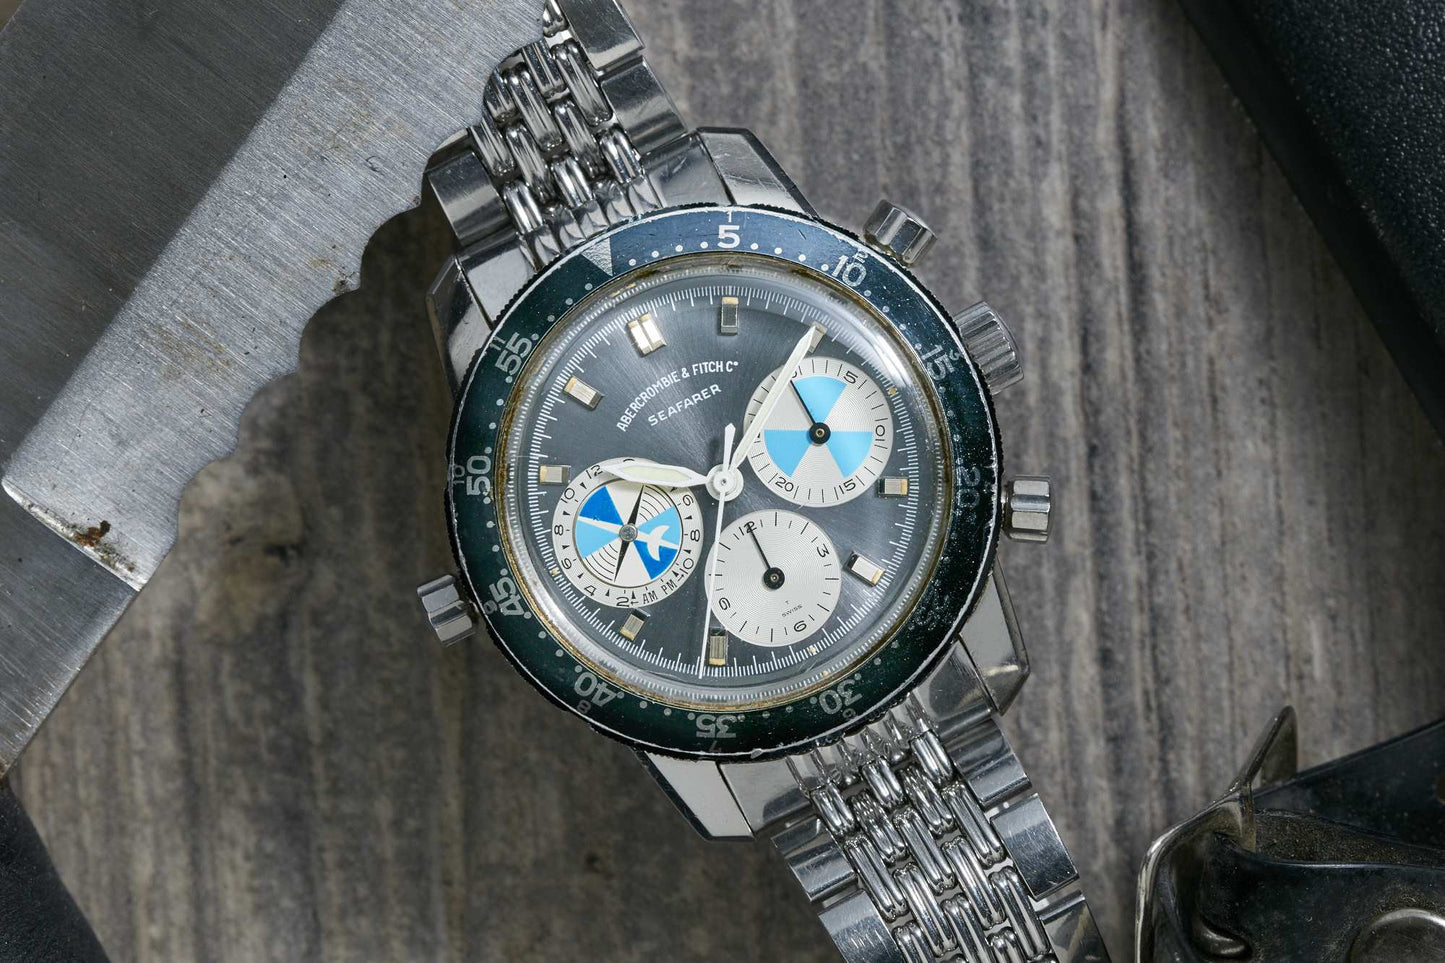 Heuer Seafarer for Abercrombie & Fitch